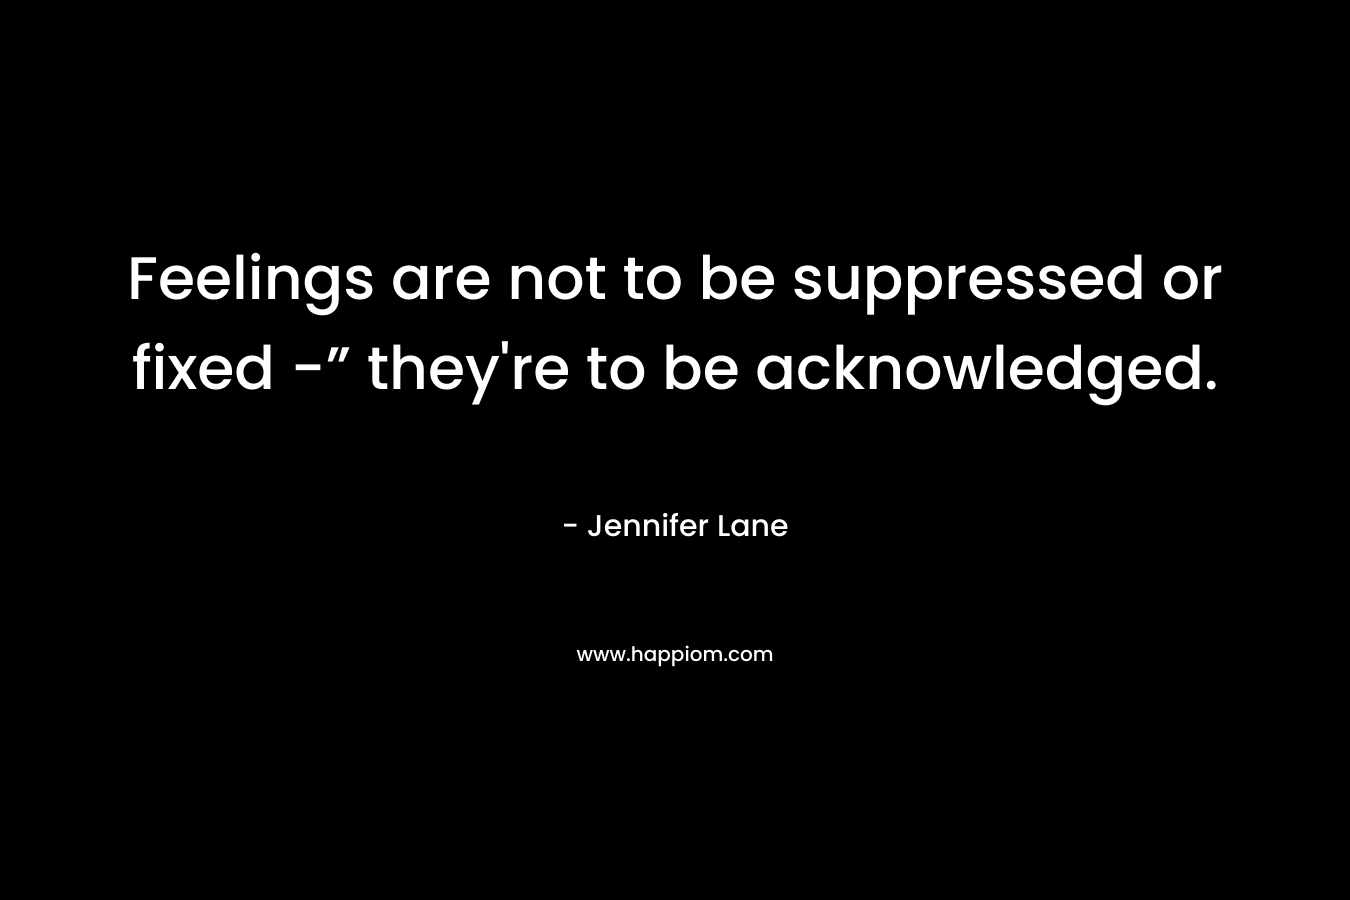 Feelings are not to be suppressed or fixed -” they're to be acknowledged.